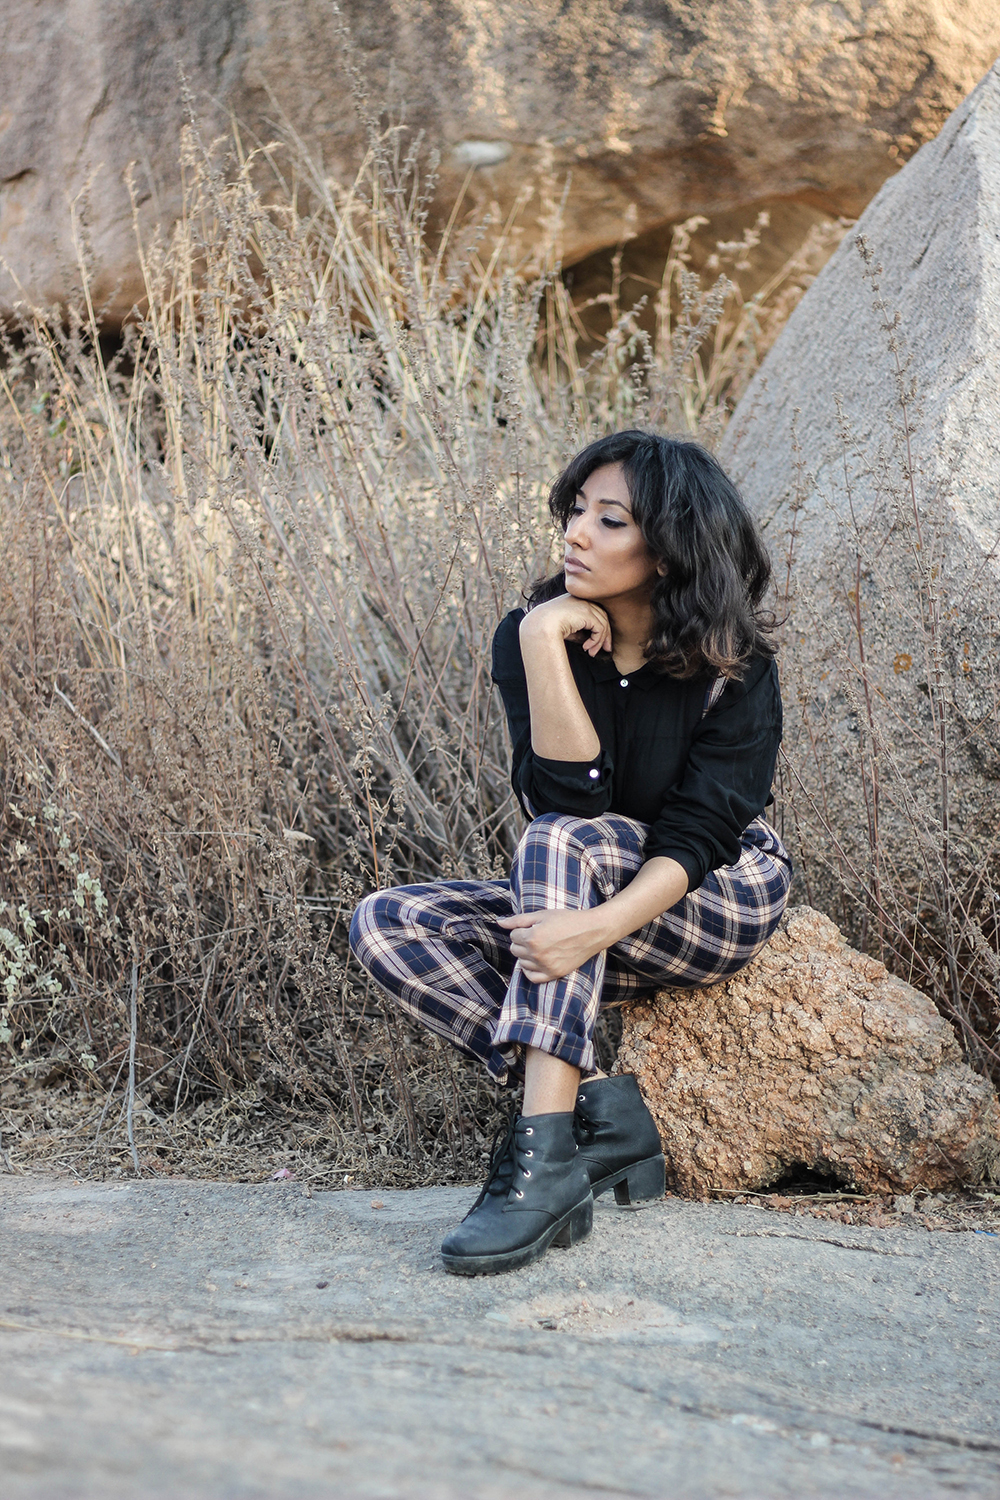 Lookbook ; Plaid ; Pants ; Suspenders ; Streetstyle ; Outfit ; fashion photography ; Romwe ; street fashion ; boots ; sunset ; strong ; Dark ; fall fashion; Naznin ; Naznin Suhaer ; dusky; model ; indian blogger ; hyderabad fashion bloggers ; hyderabad bloggers ; hyderabad fashion blogger ; I Dress for the Applause 